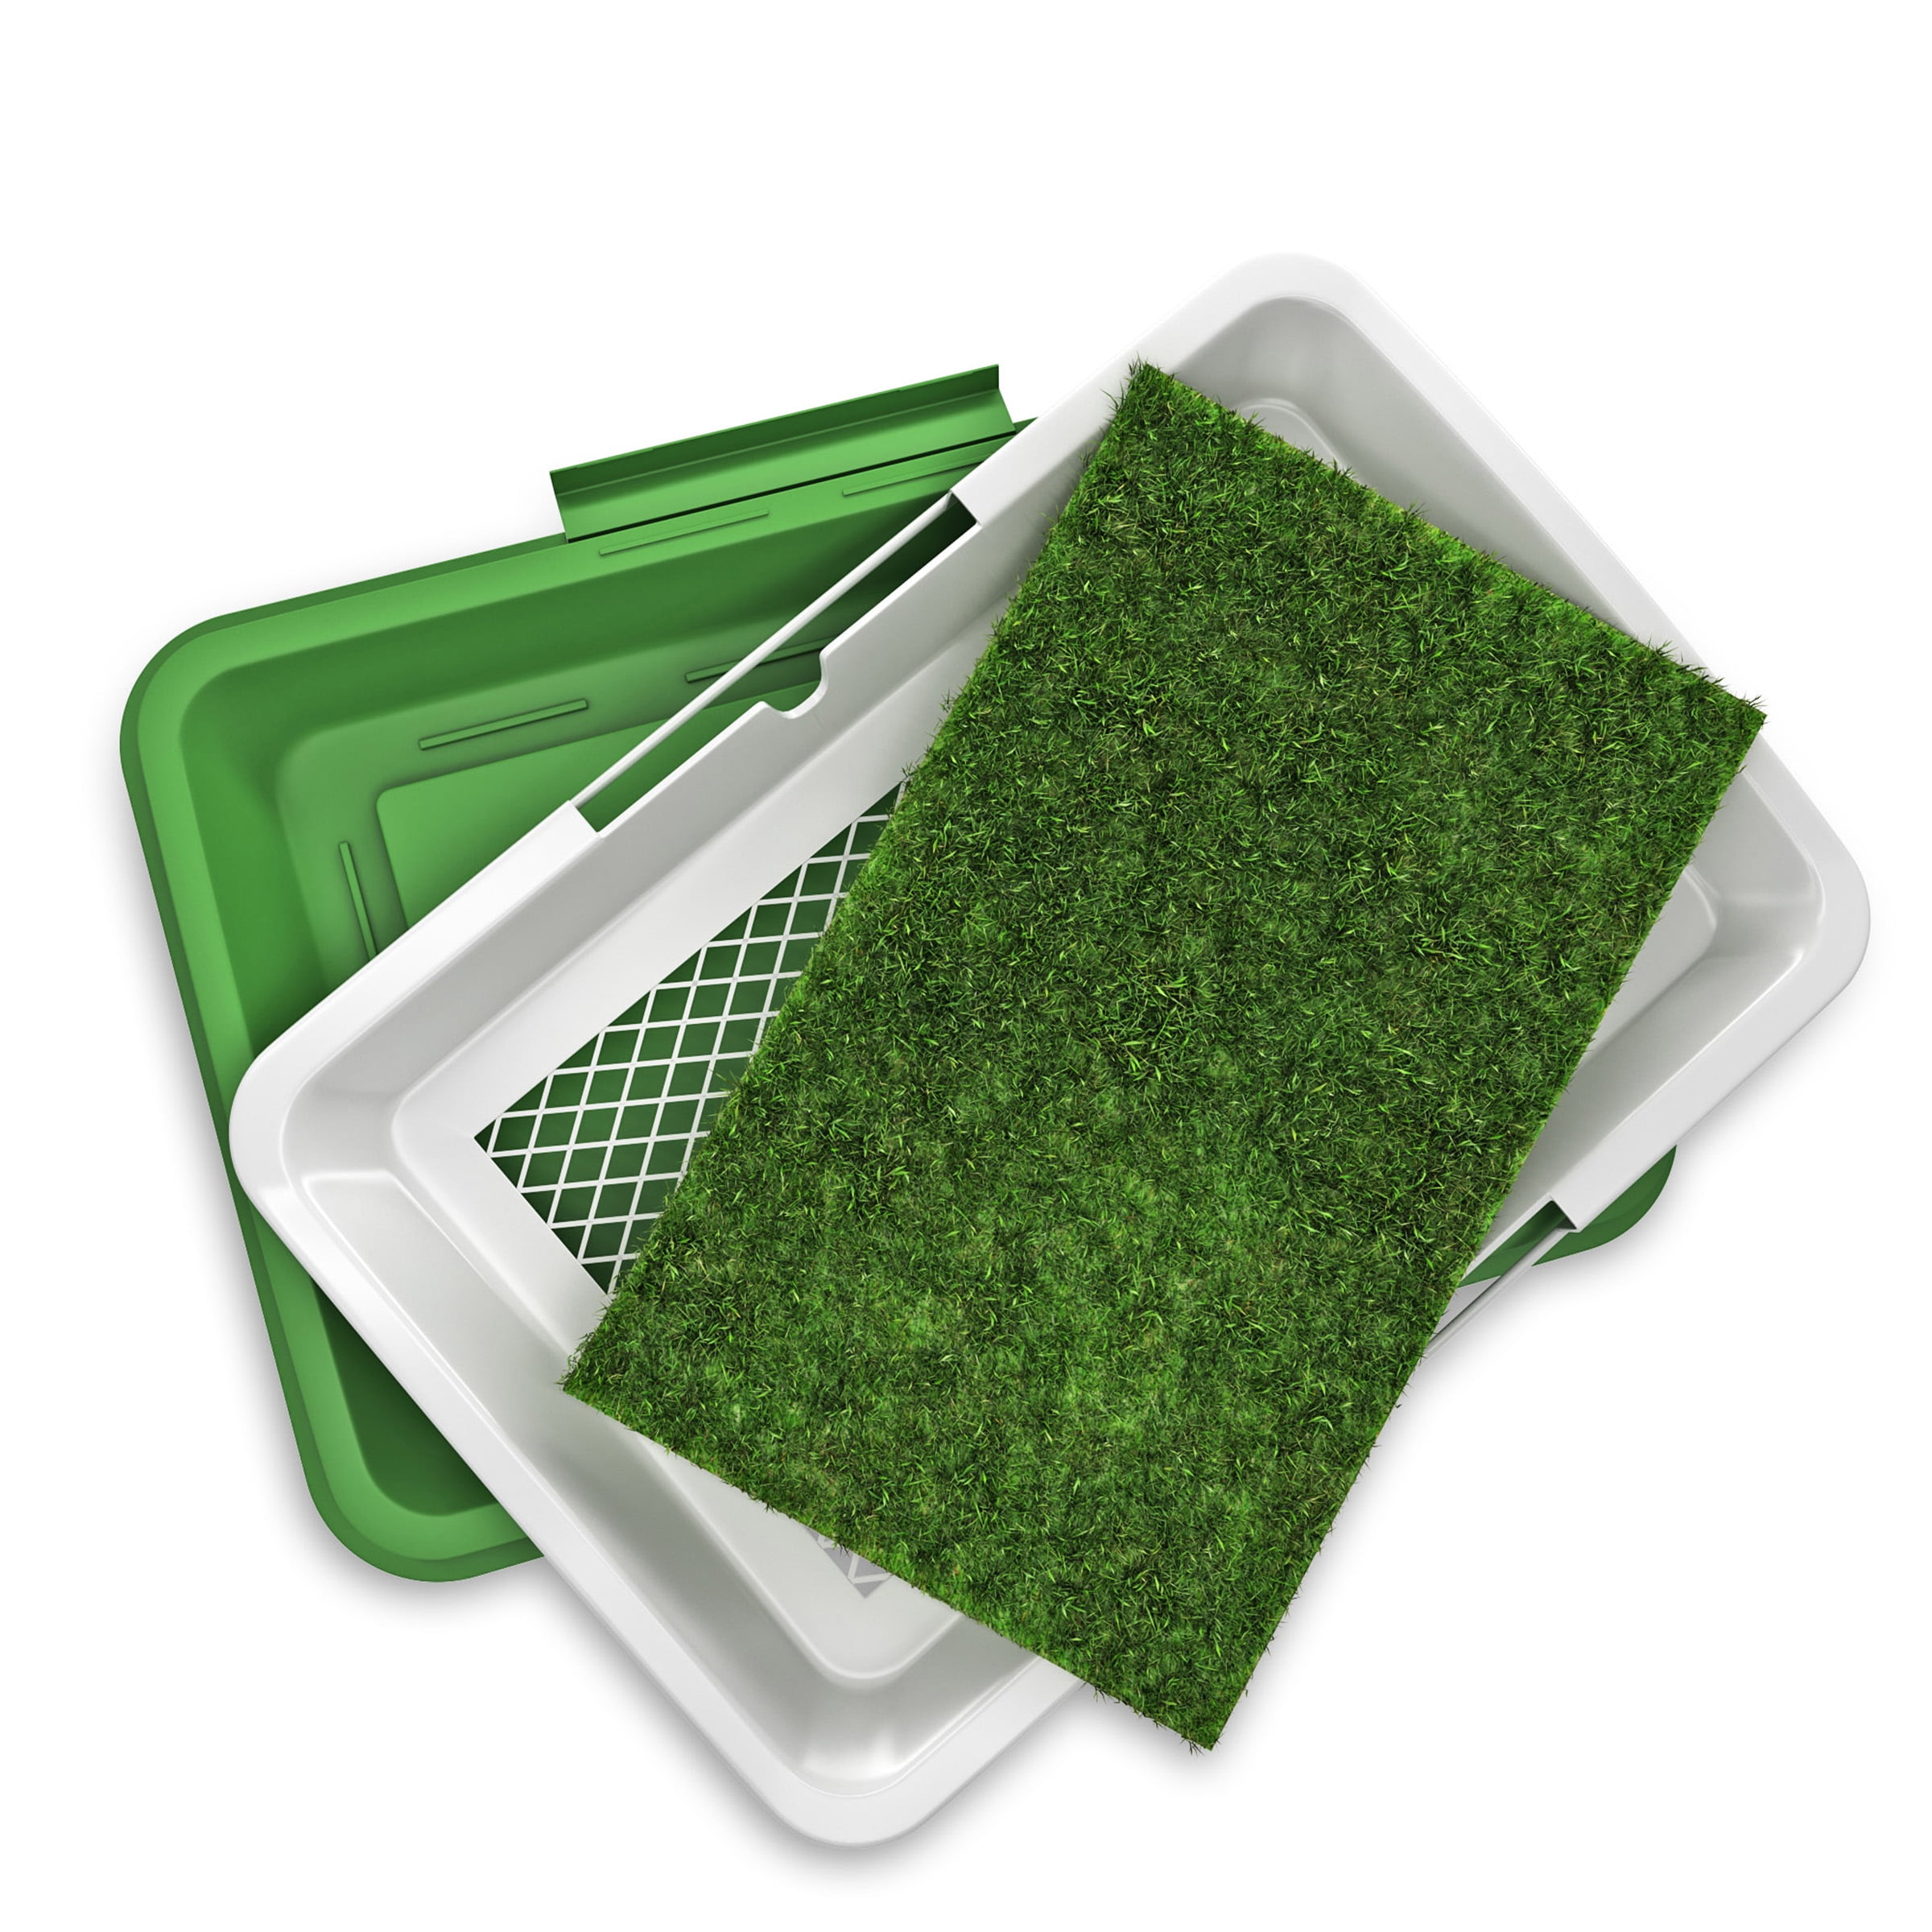 Petmaker Reusable 4-Layer Artificial Grass Puppy Dog Potty Pad with Tray - Large, 20x30